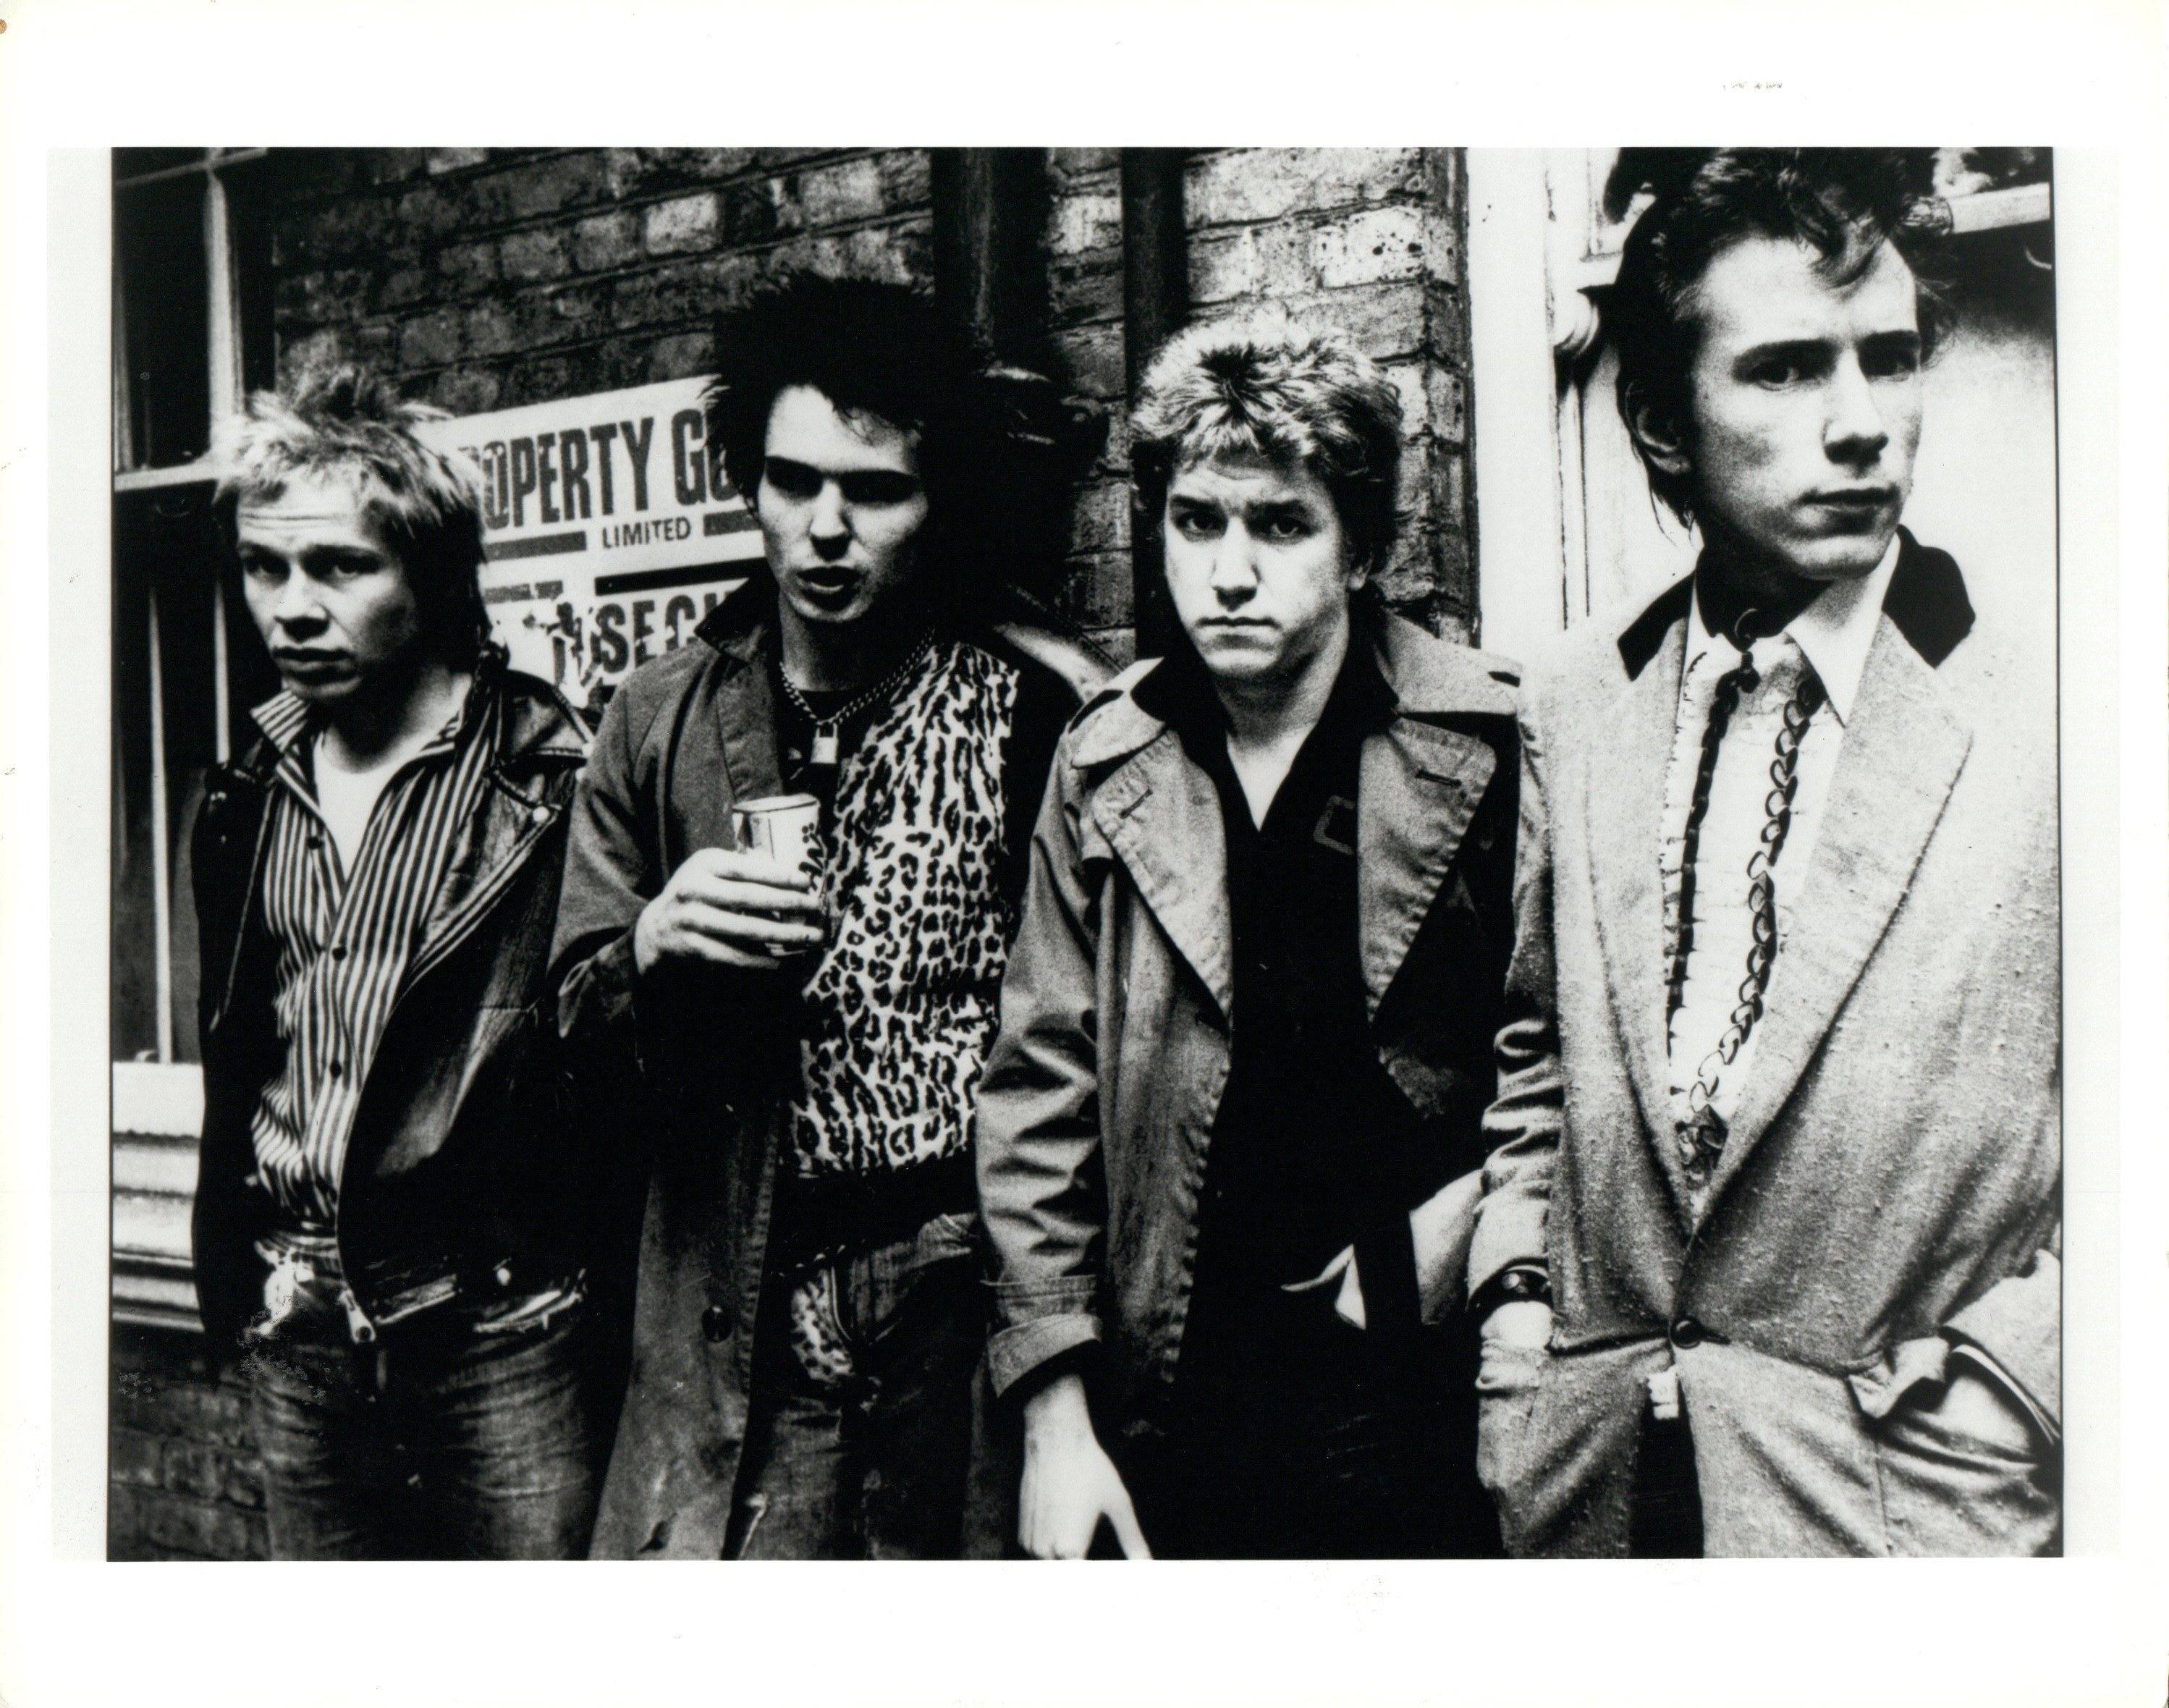 Adrian Boot Black and White Photograph - The Sex Pistols on the Street Vintage Original Photograph